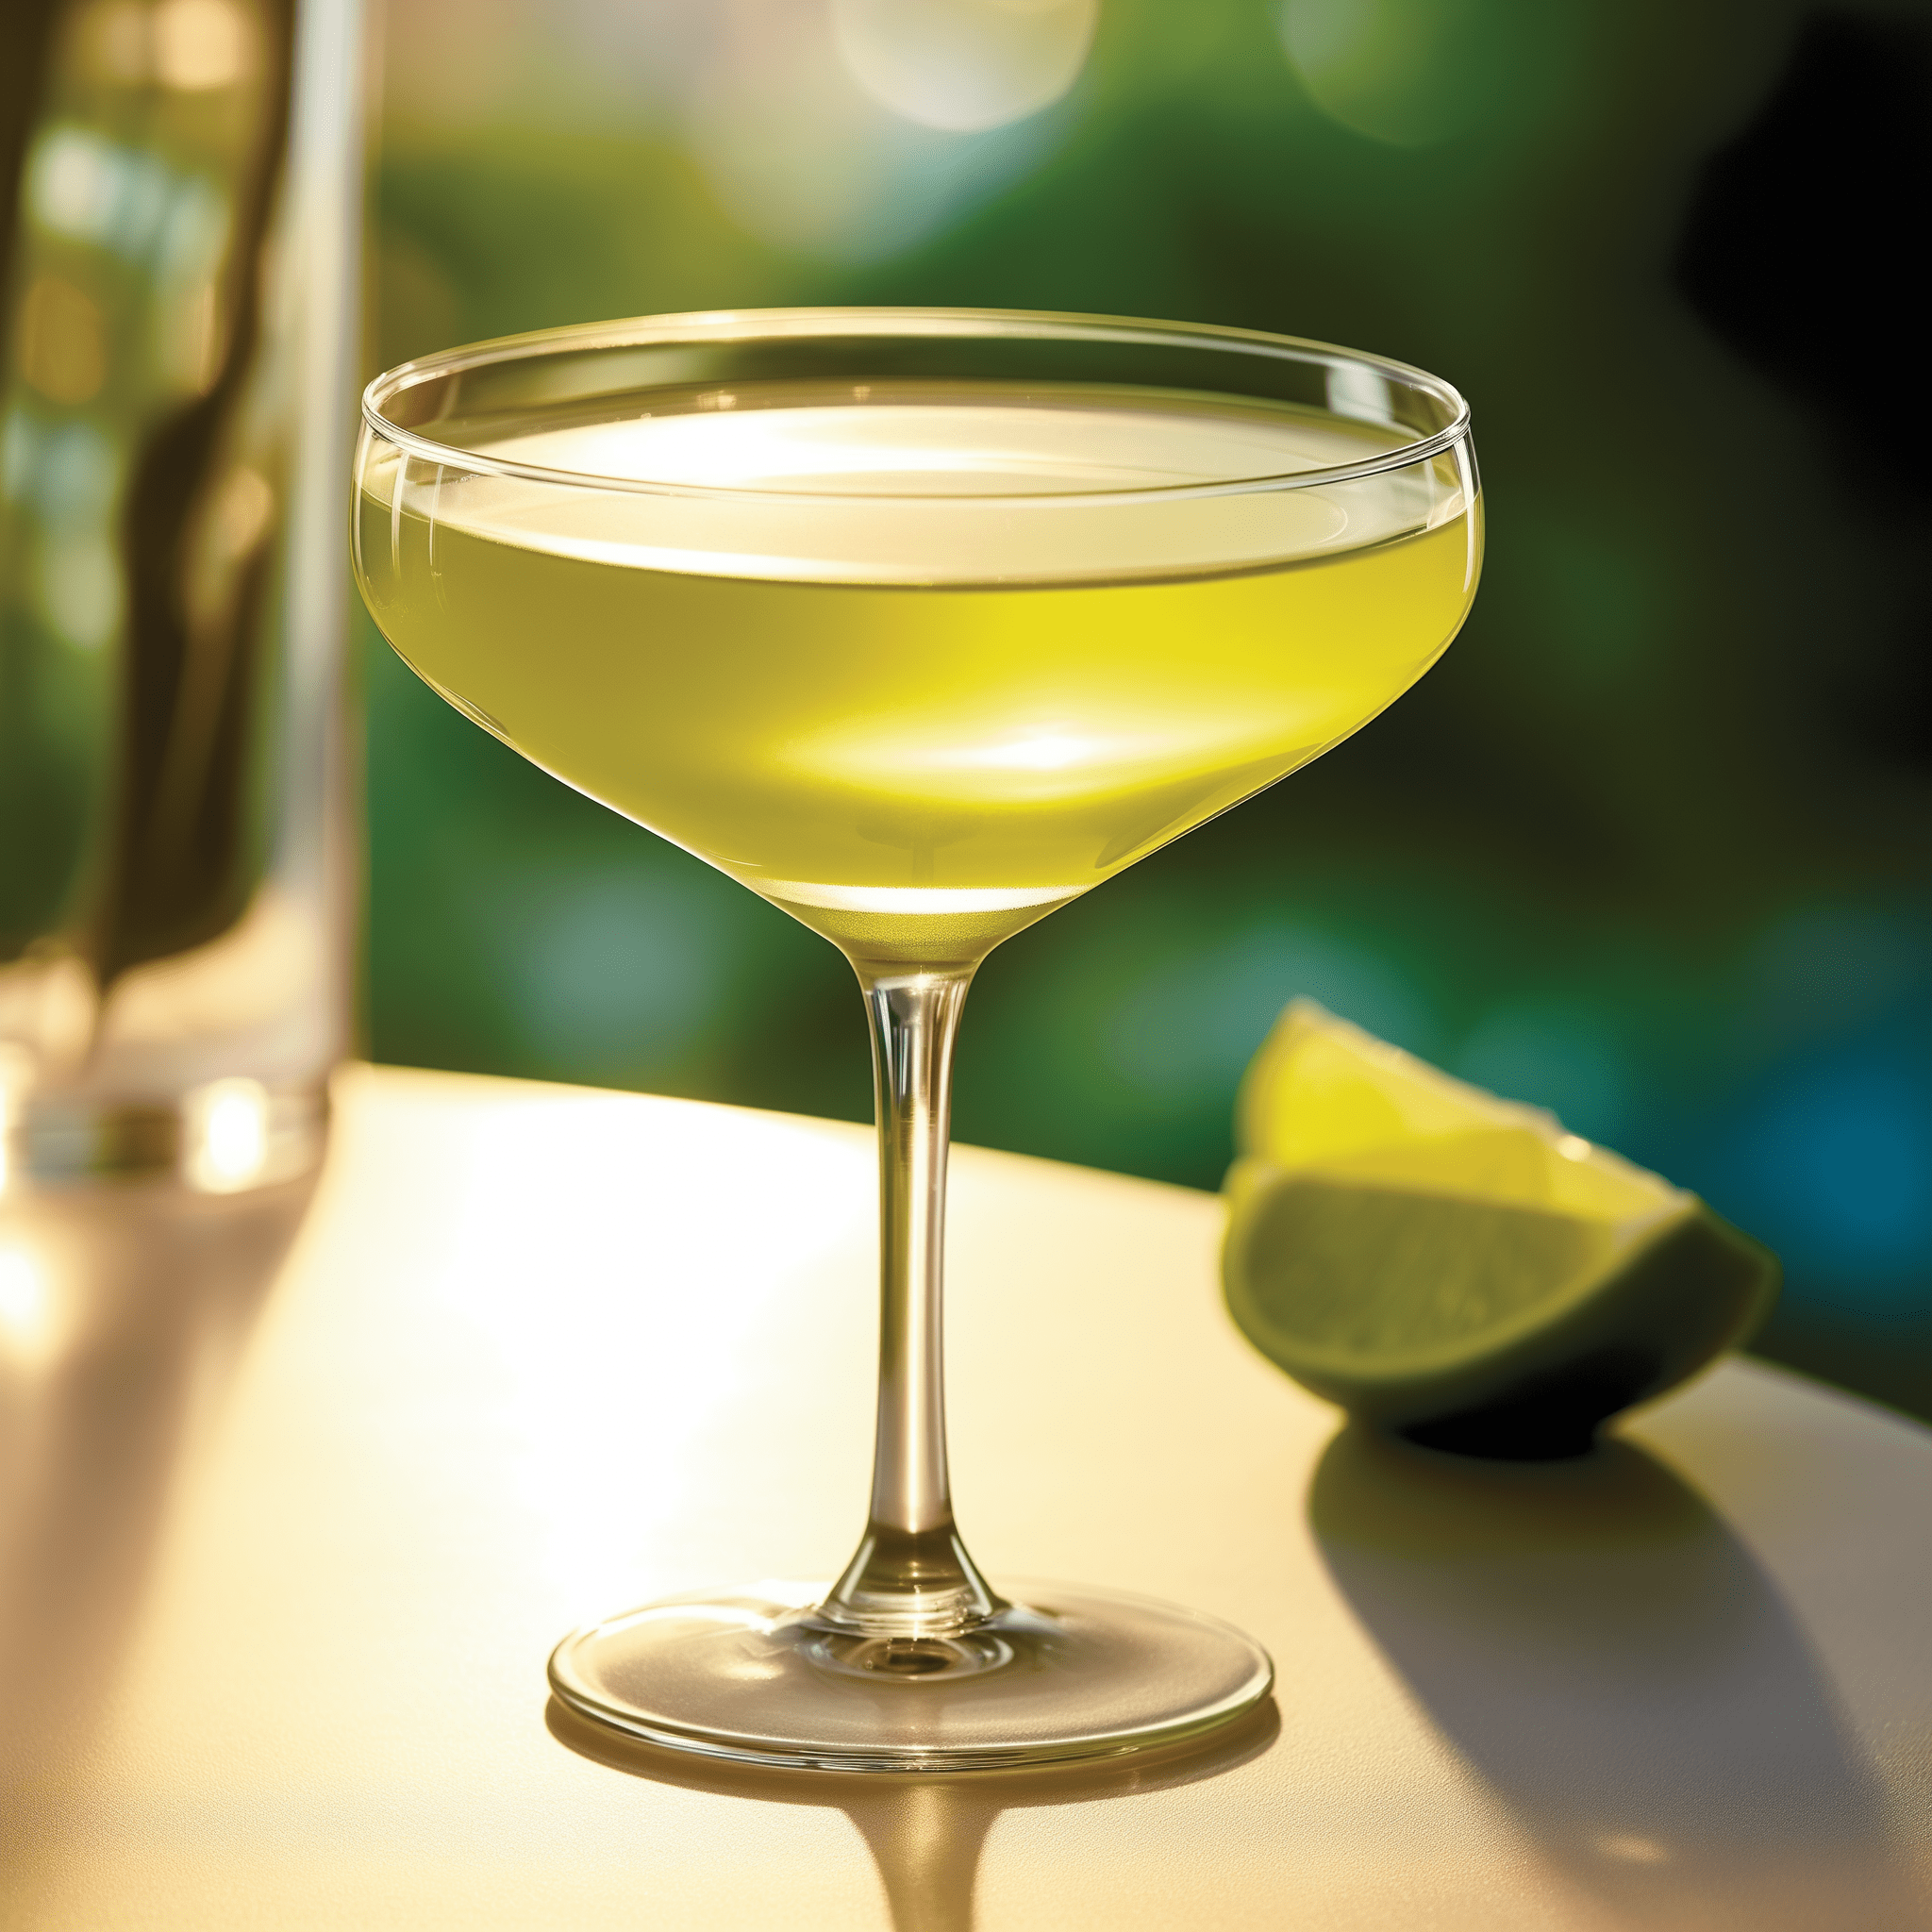 Bourbon Gimlet Cocktail Recipe - The Bourbon Gimlet offers a harmonious blend of the warm, vanilla and caramel notes of bourbon with the bright, tartness of fresh lime juice. It's a refreshing cocktail with a sweet and sour profile, balanced by the subtle complexity of the bourbon.